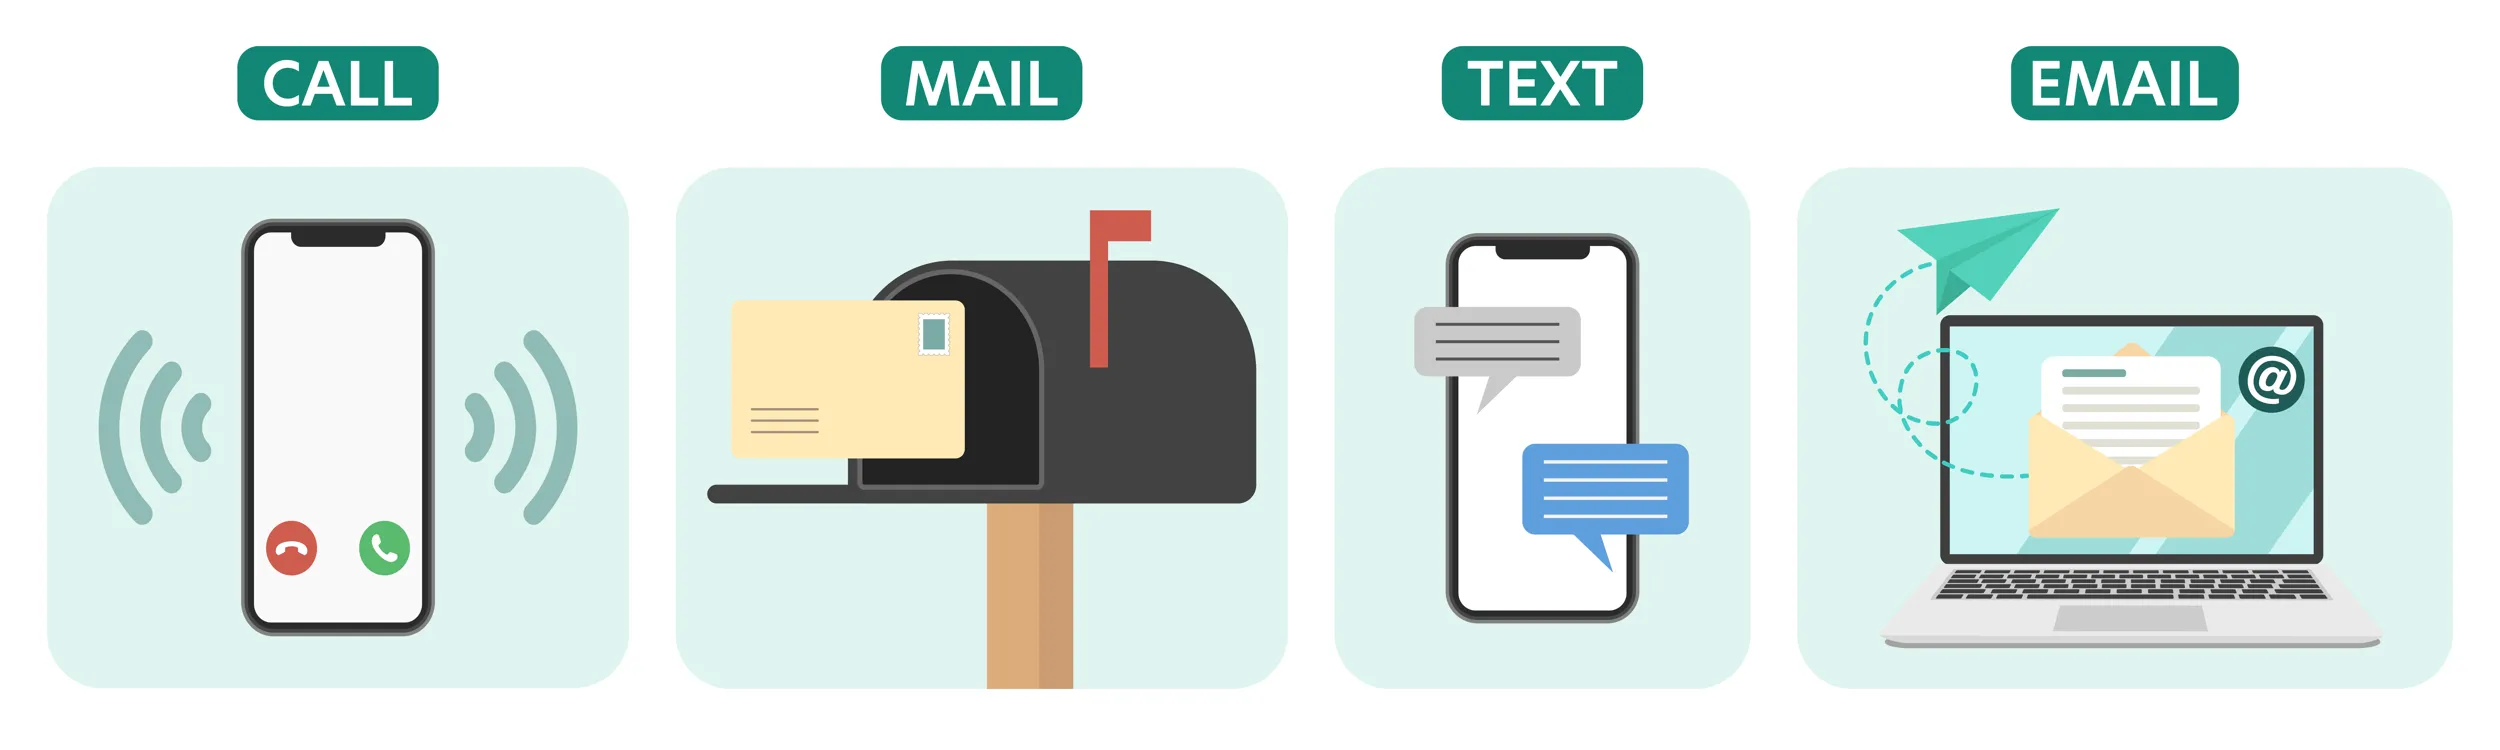 A phone receiving a call, a mail box with mail sticking out, a phone with a SMS conversation, and a laptop sending email.